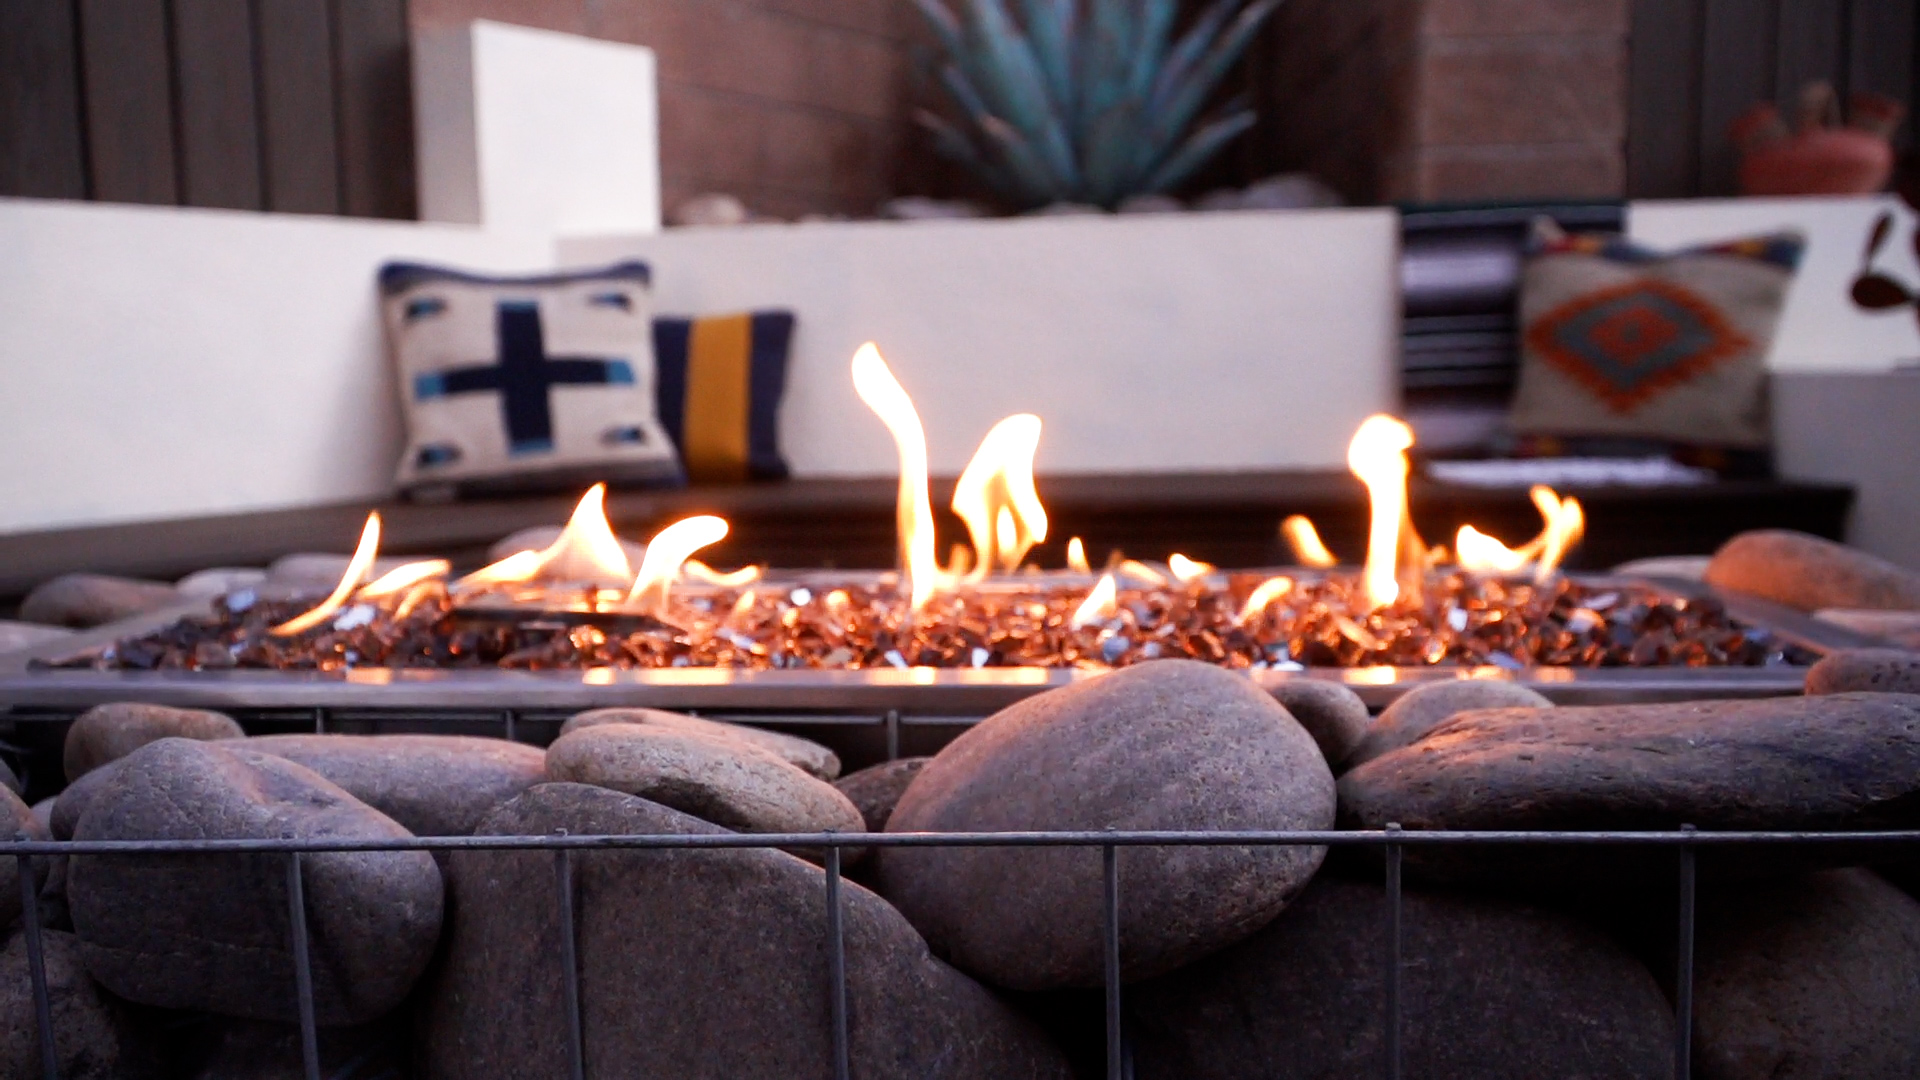 Are Fire Pits Bad for the Environment? - Fire Pit Art®